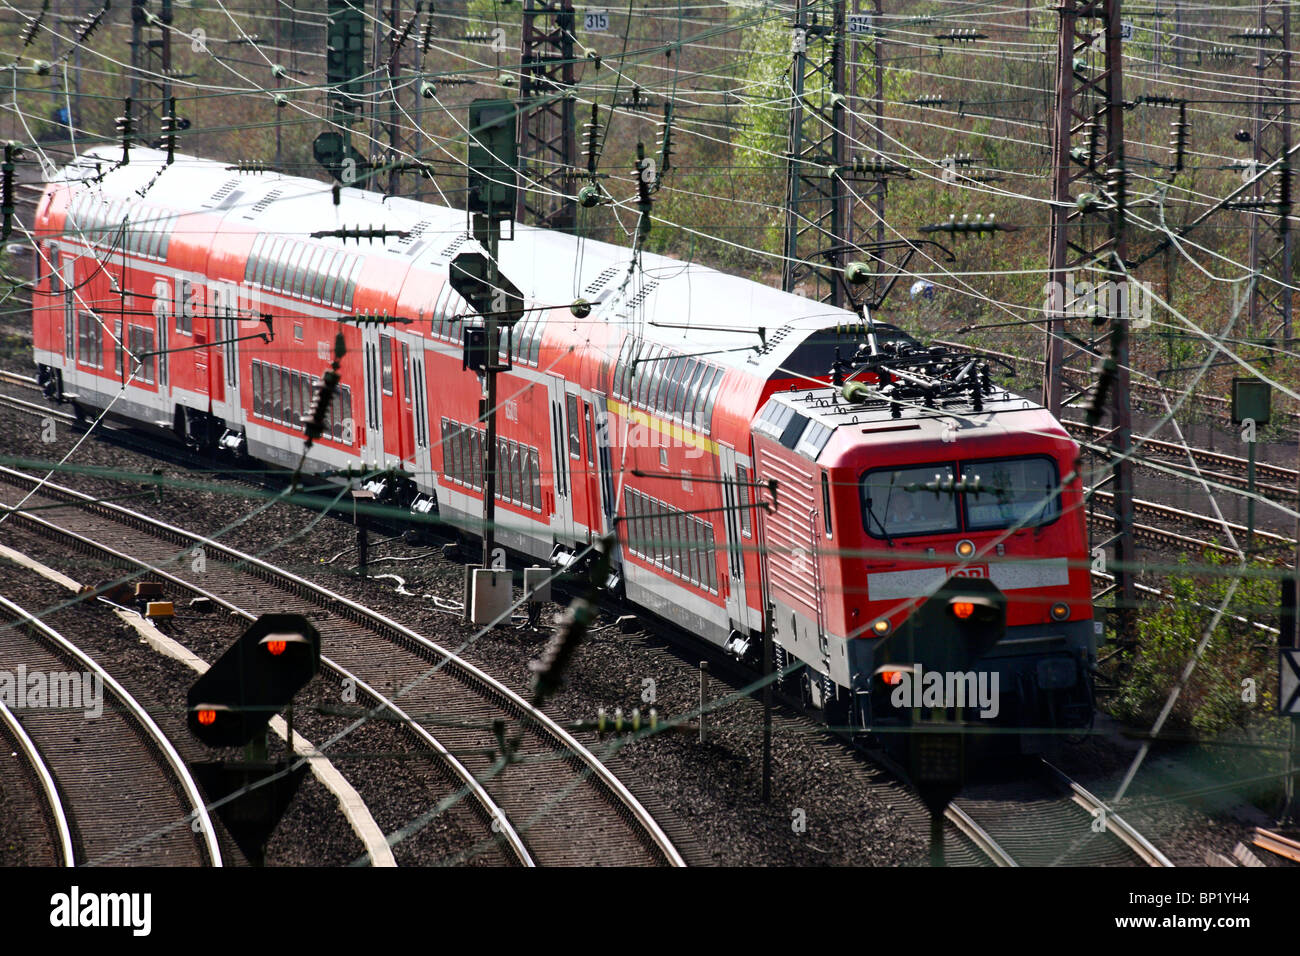 Trains on the track, public transport. Stock Photo